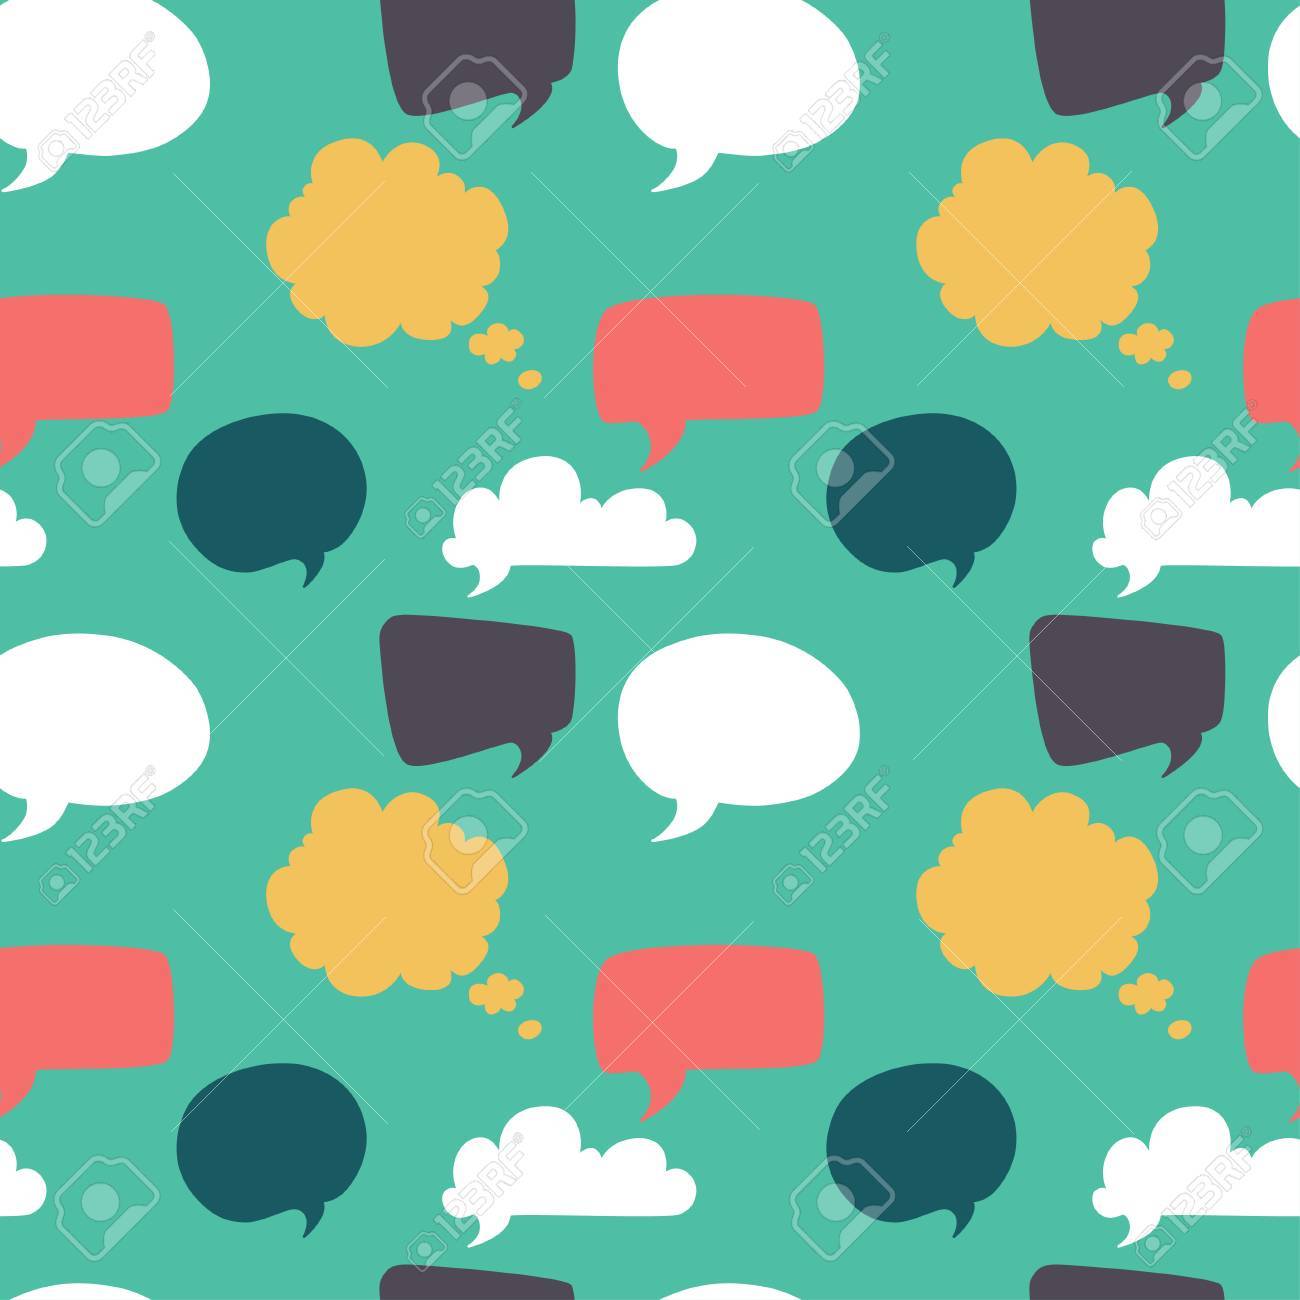 Seamless Pattern With Colorful Speech And Thought Bubbles Flat